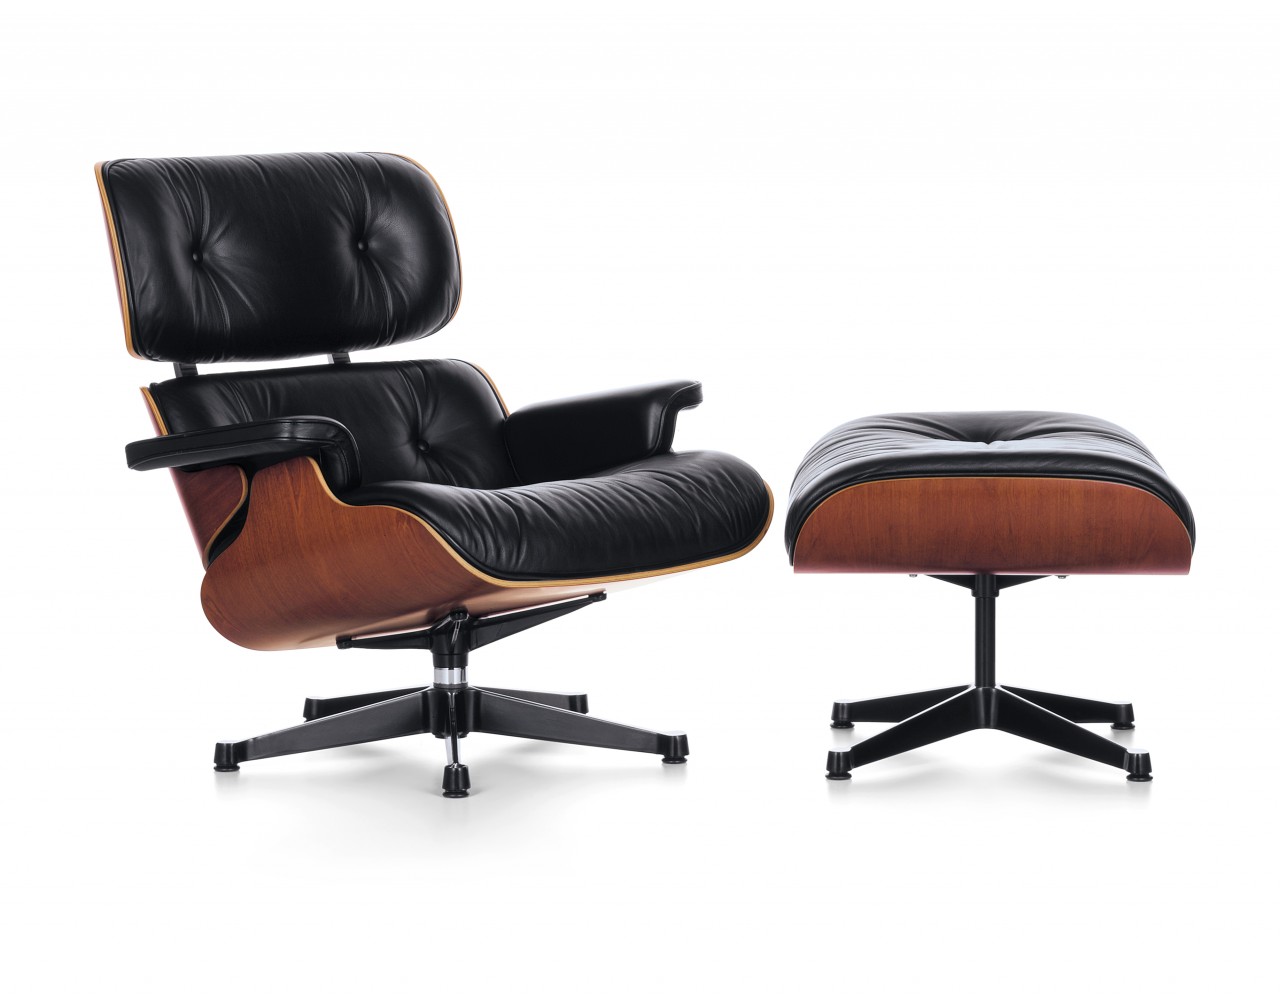 Designers - Charles and Ray Eames